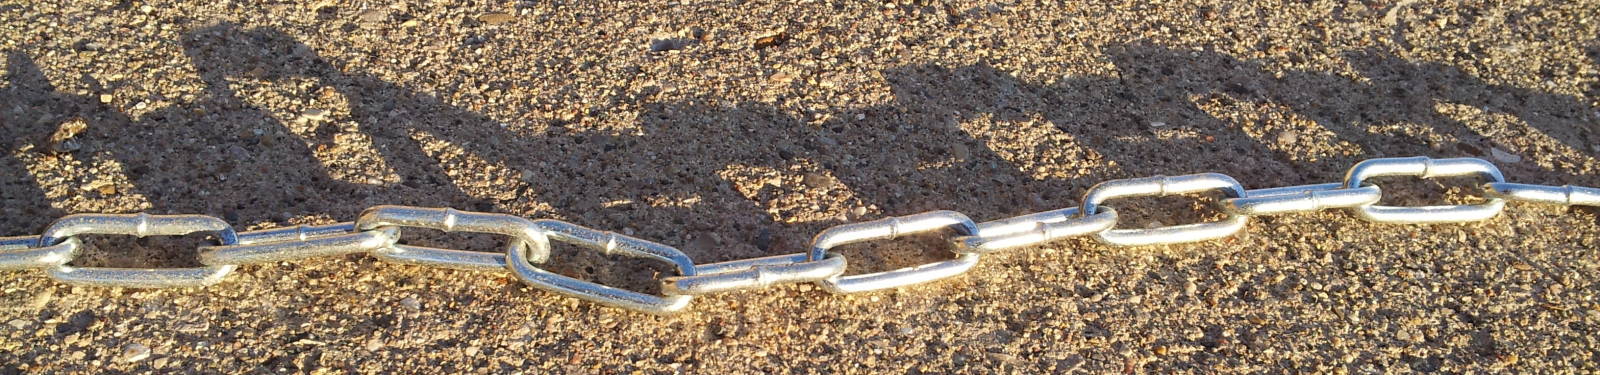 Metal chain in the sunlight.